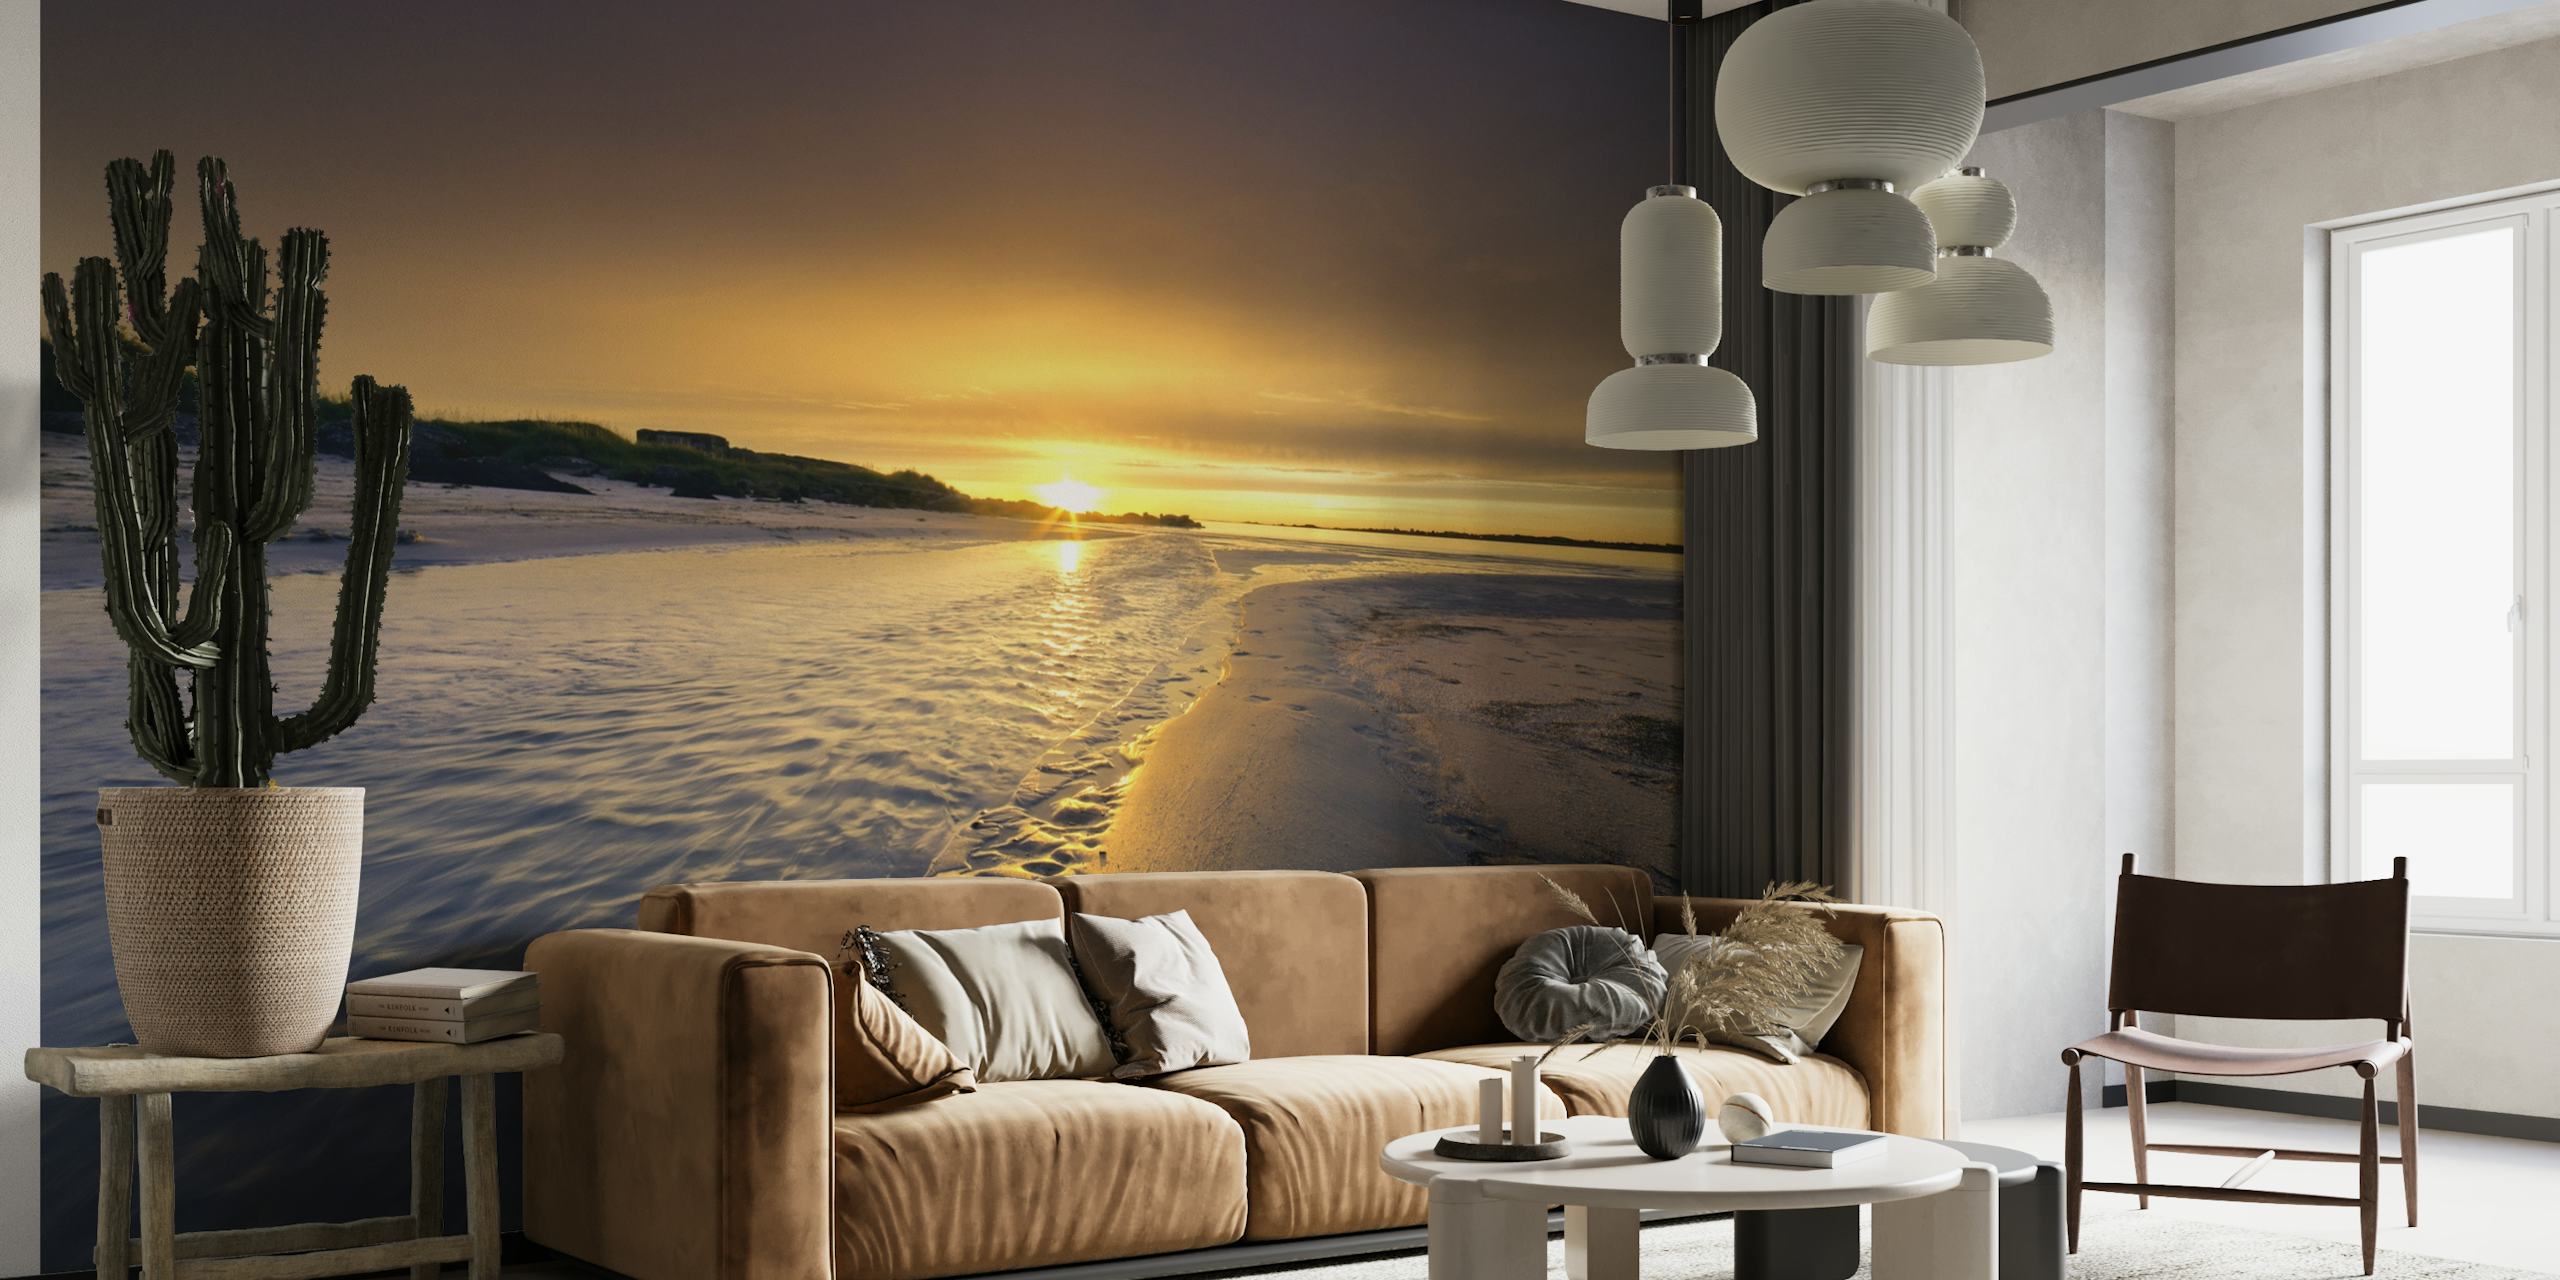 A tranquil beach scene at sunset with footprints in the sand wall mural.